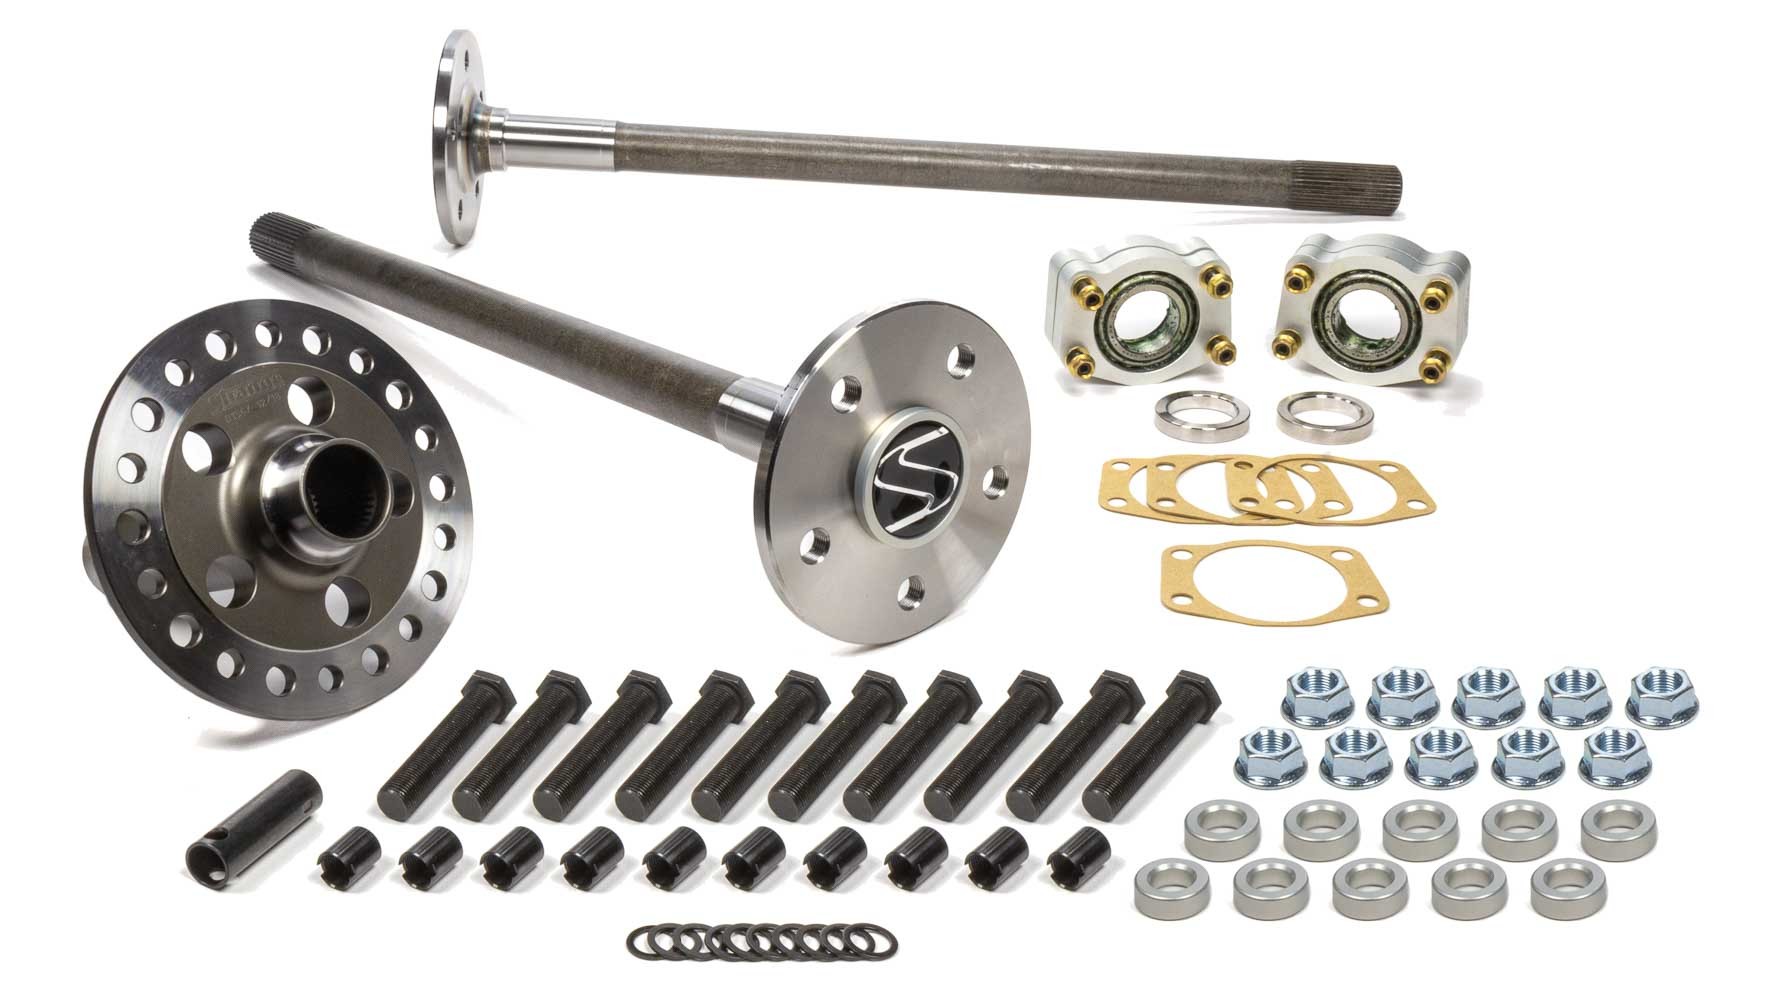 Strange Engineering P3509F8658S Spool and Axle Kit, Pro Steel, 35 Spline, C-Clip Eliminator / Gaskets / Hardware and 5/8-18 in Studs Included, Drum Brakes, Ford 8.8 in, Ford Mustang 1986-93, Kit